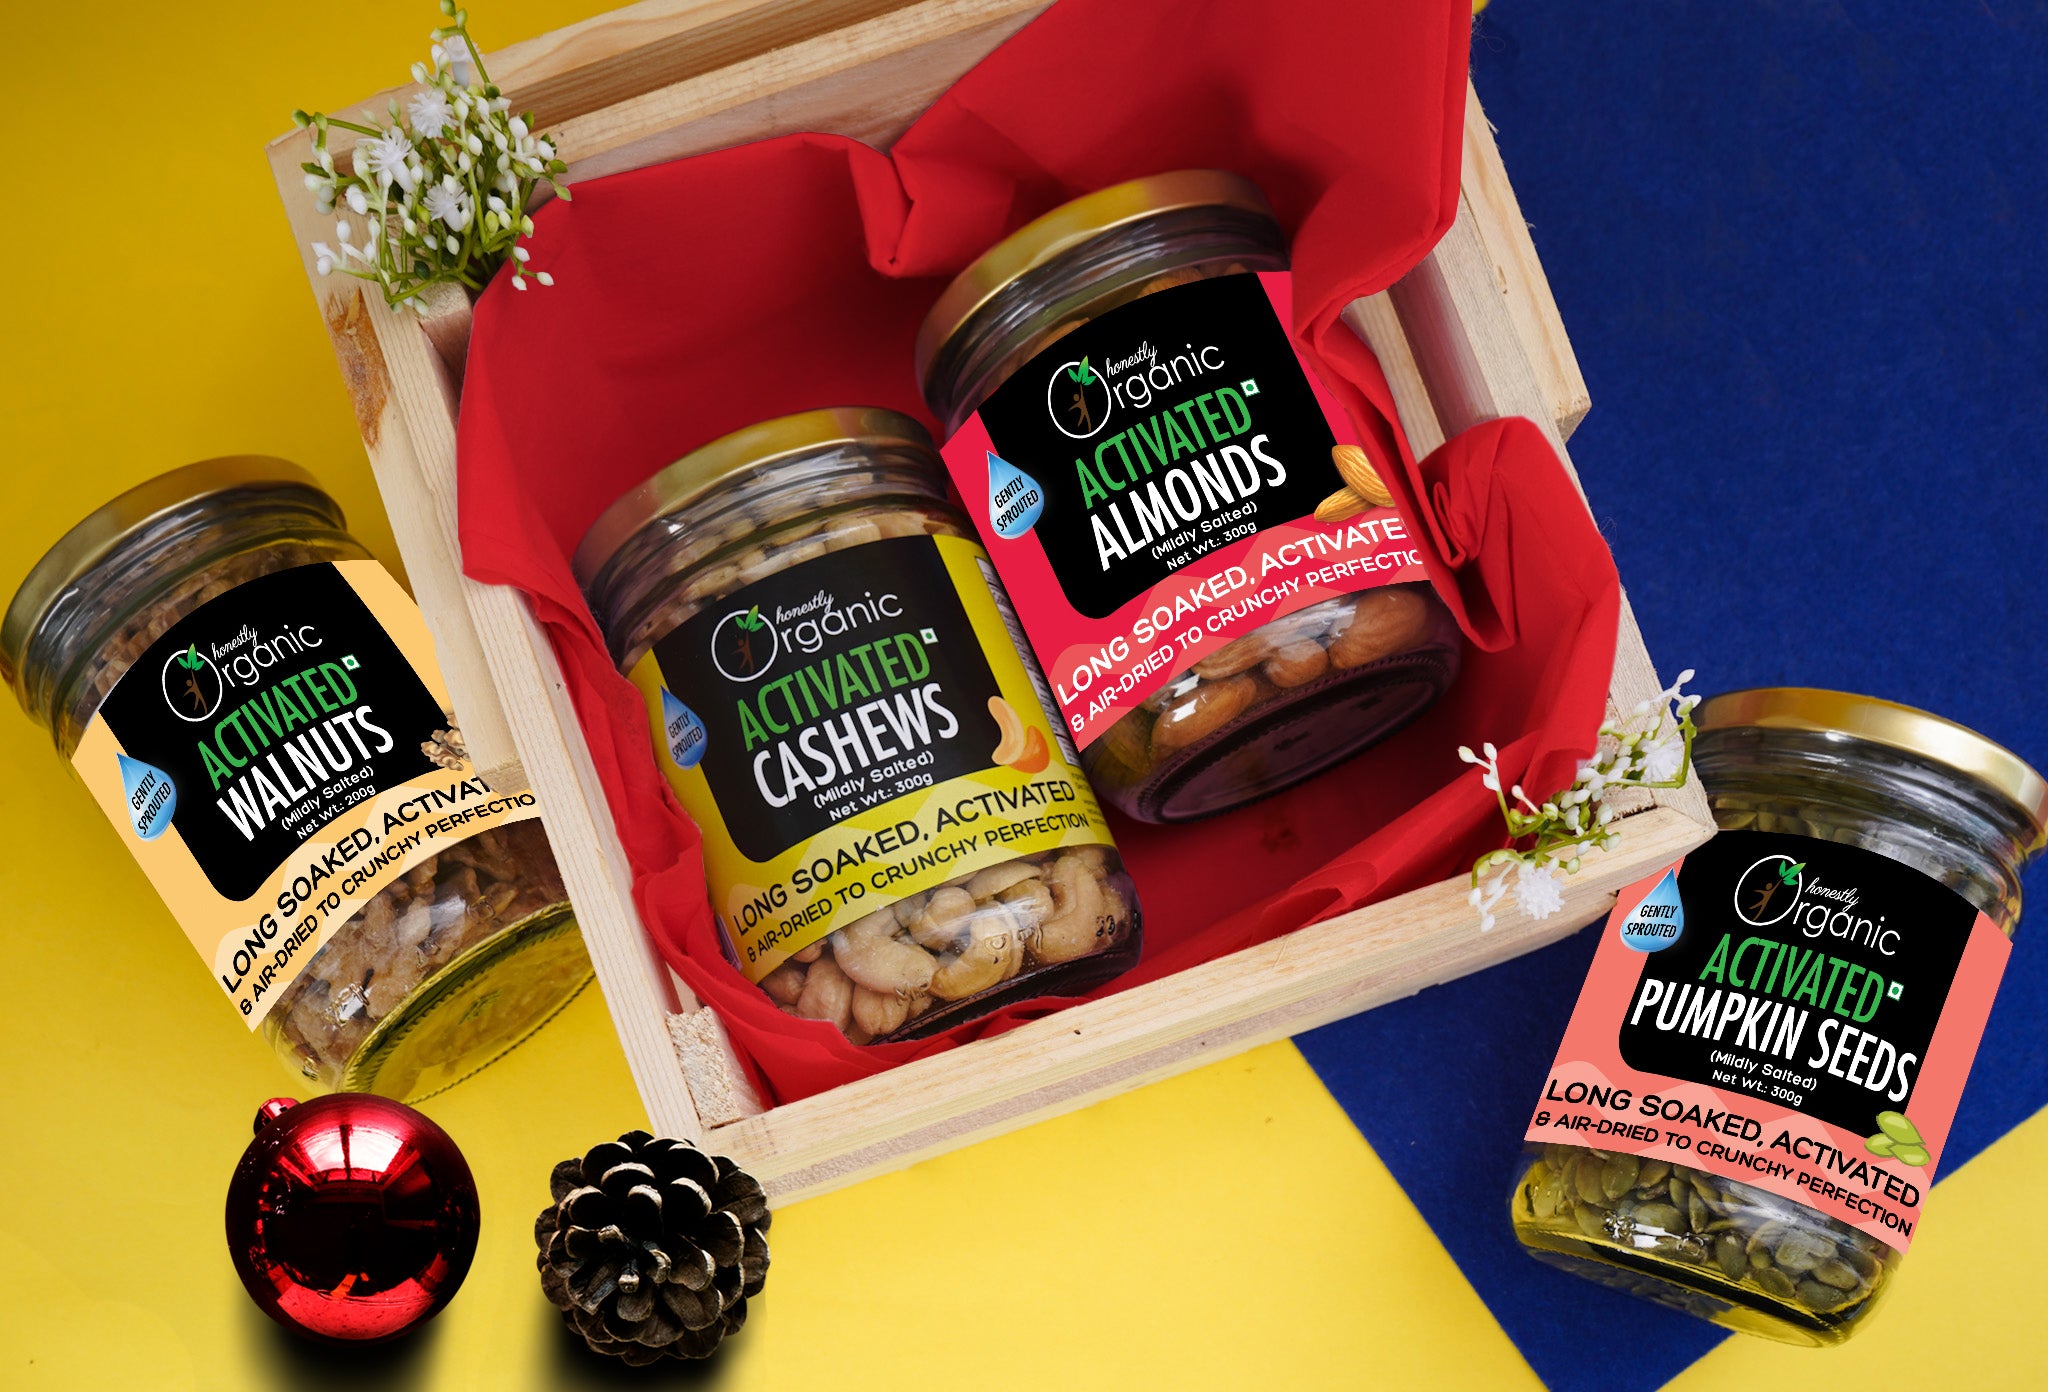 D-Alive Special Christmas Hamper (Activated Walnuts  200g + Activated Pumpkin Seeds 300g + Activated Cashews 300g + Activated Almonds 300g) - 1100g (Diabetes Friendly, Organic, No Gluten, No Sugar, Vegan, Natural)